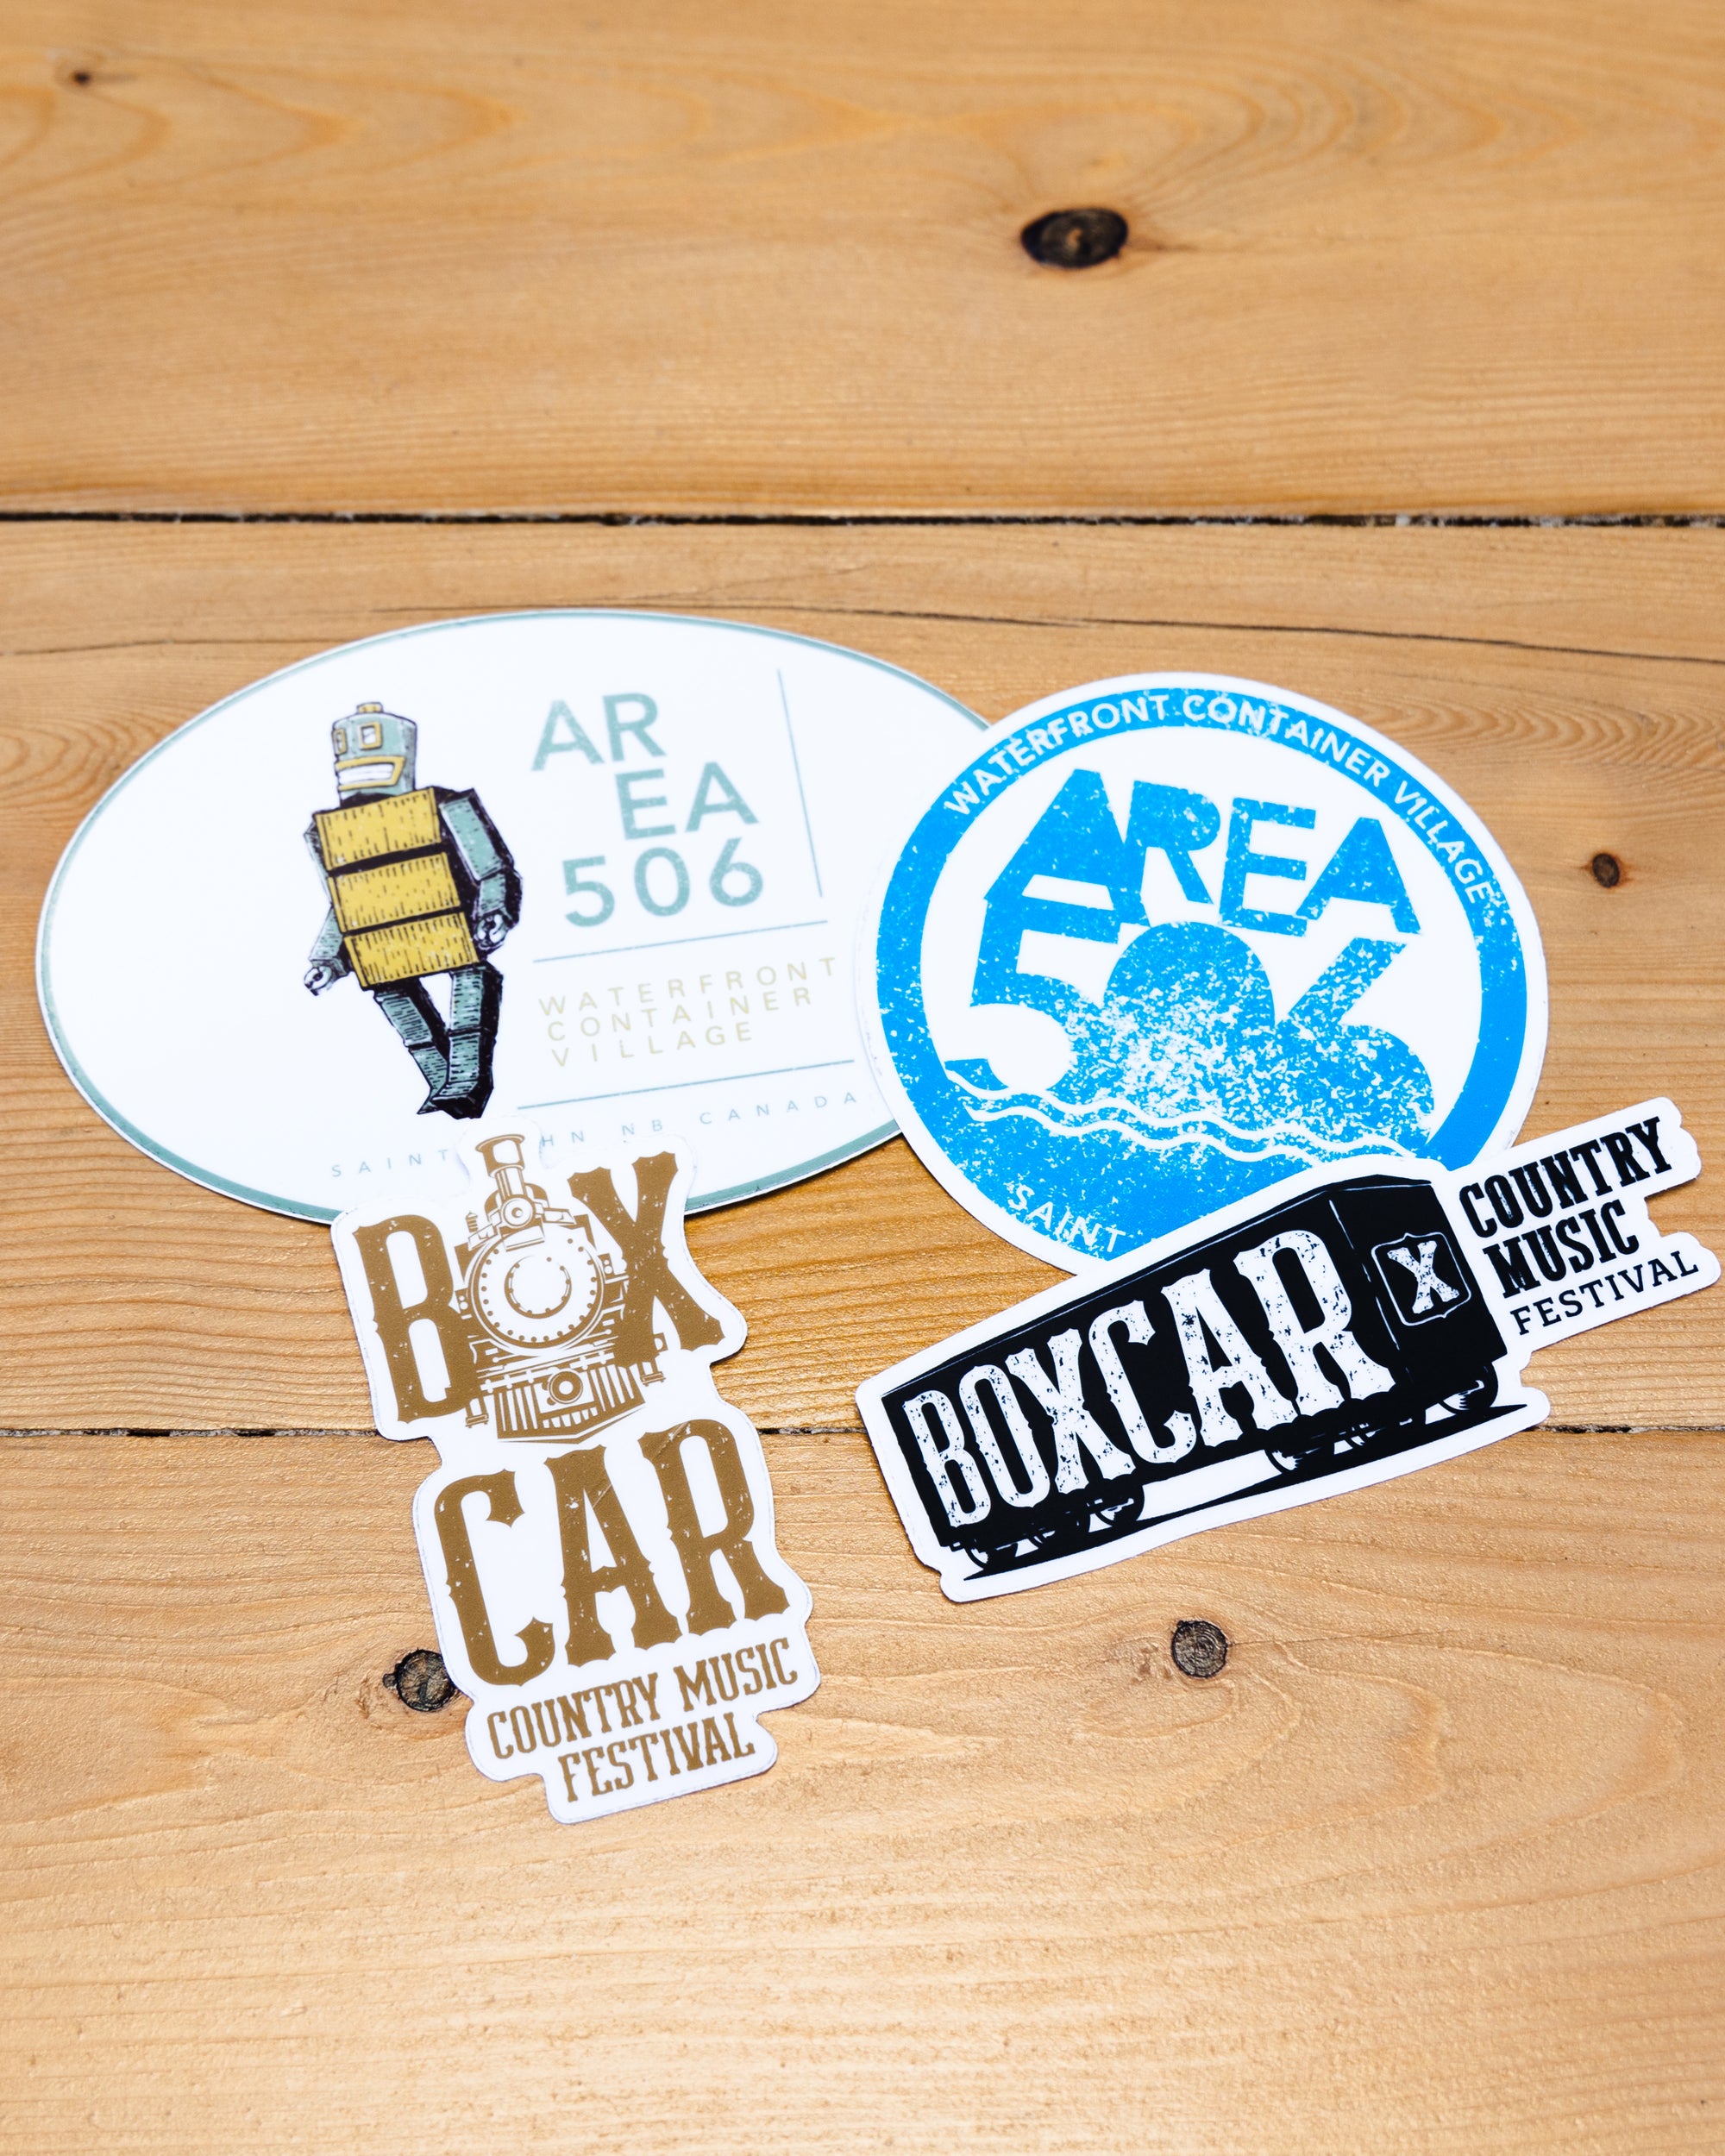 Oval AREA 506 branded with the robot mascot, blue AREA 506 Waterfront Container Village round, black Boxcar Country Music Festival, or Gold Boxcar Country Music Festival sticker.